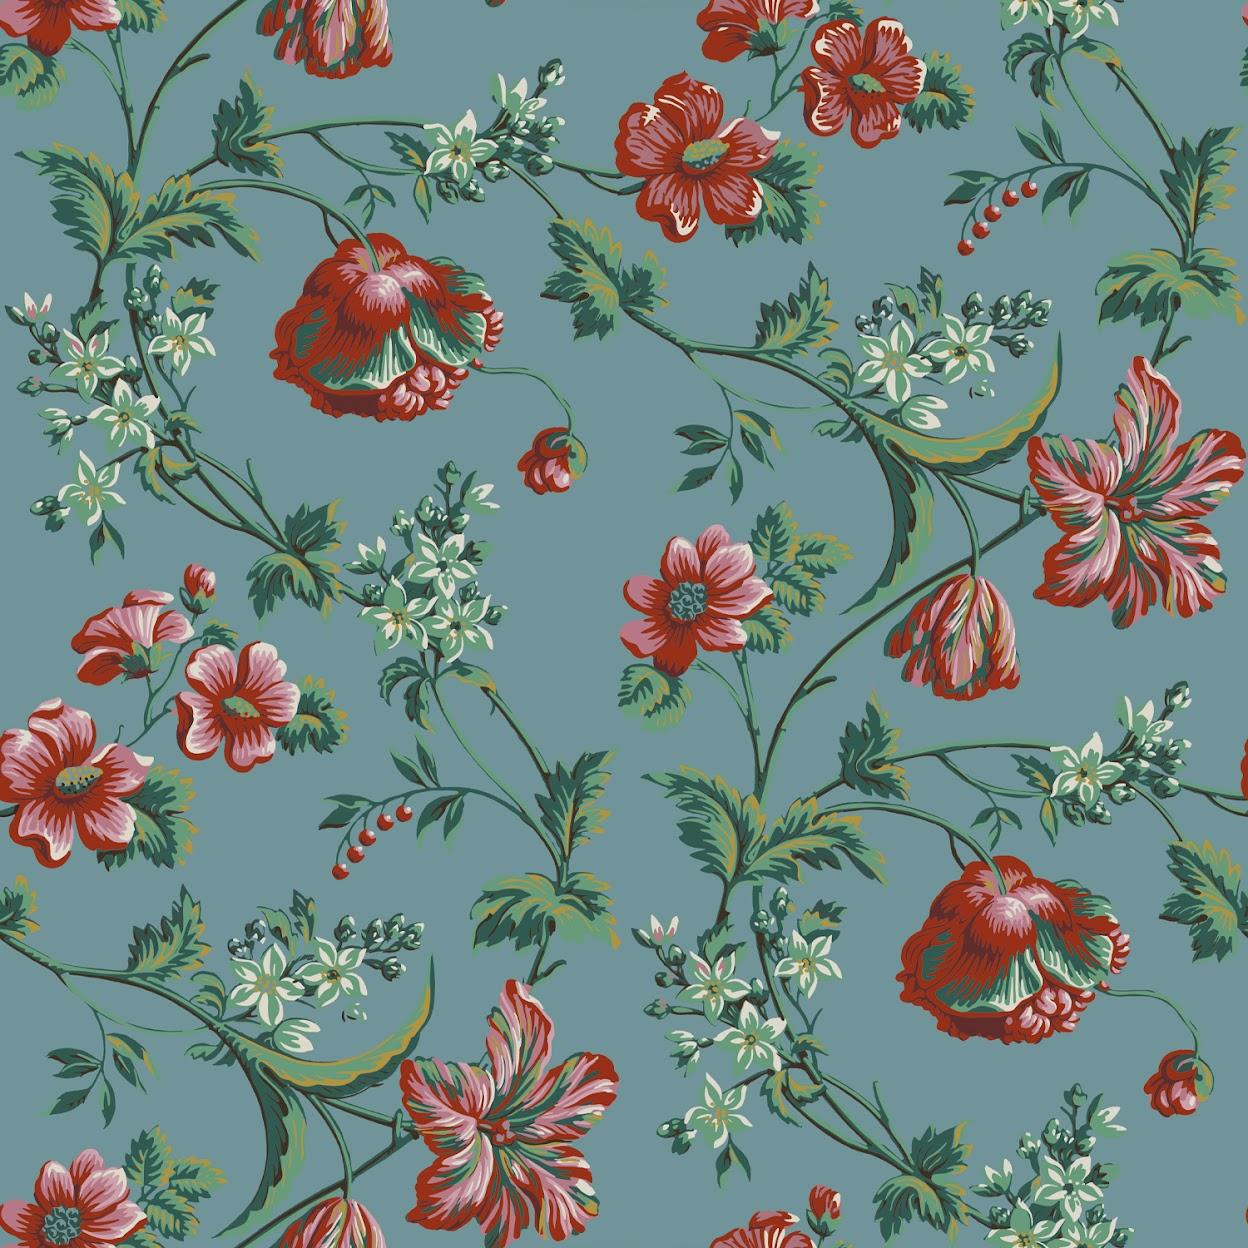 Repeat: 69,9 cm / 27.5 in

Founded in 2019, the French wallpaper brand Papier Francais is defined by the rediscovery, restoration, and revival of iconic wallpapers dating back to the French “Golden Age of wallpaper” of the 18th and 19th centuries.